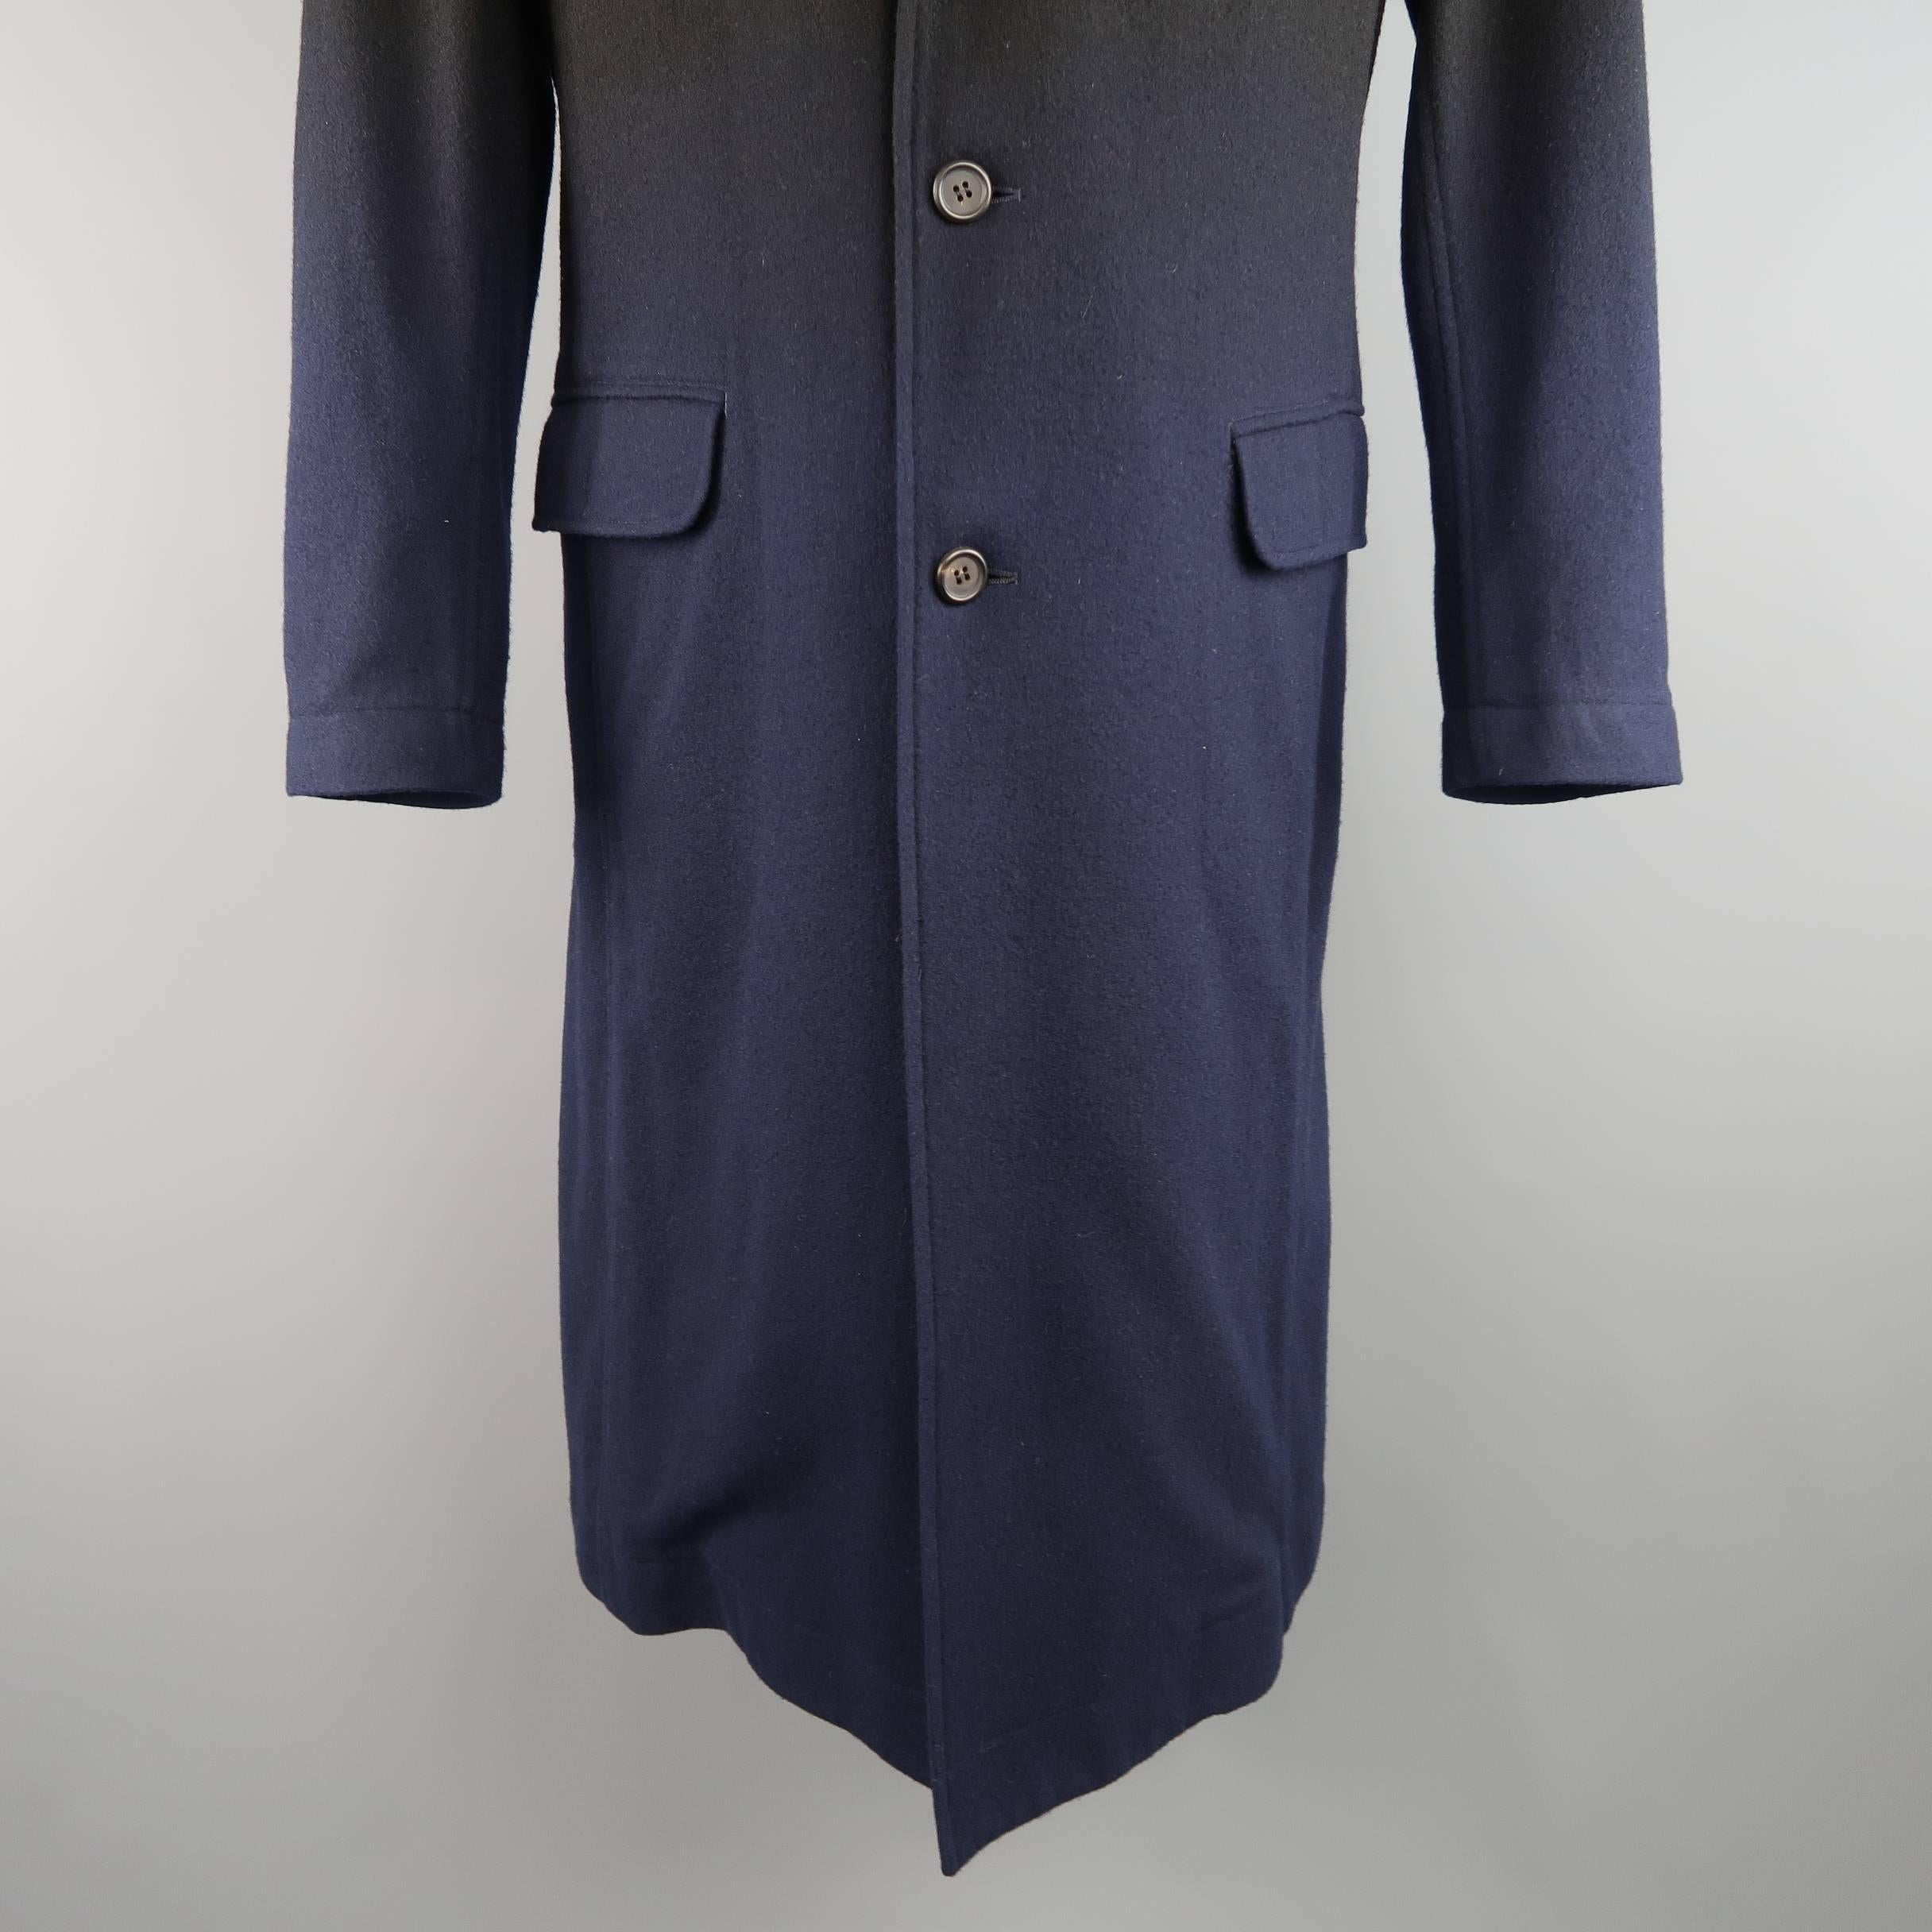 Archive ISSEY MIYAKE overcoat comes in a black wool blend and features a notch lapel, three button front, flap pockets, and overall navy blue ombre gradient effect throughout. Includes original tag. Made in Japan.
 
Good Pre-Owned Condition.
Marked: